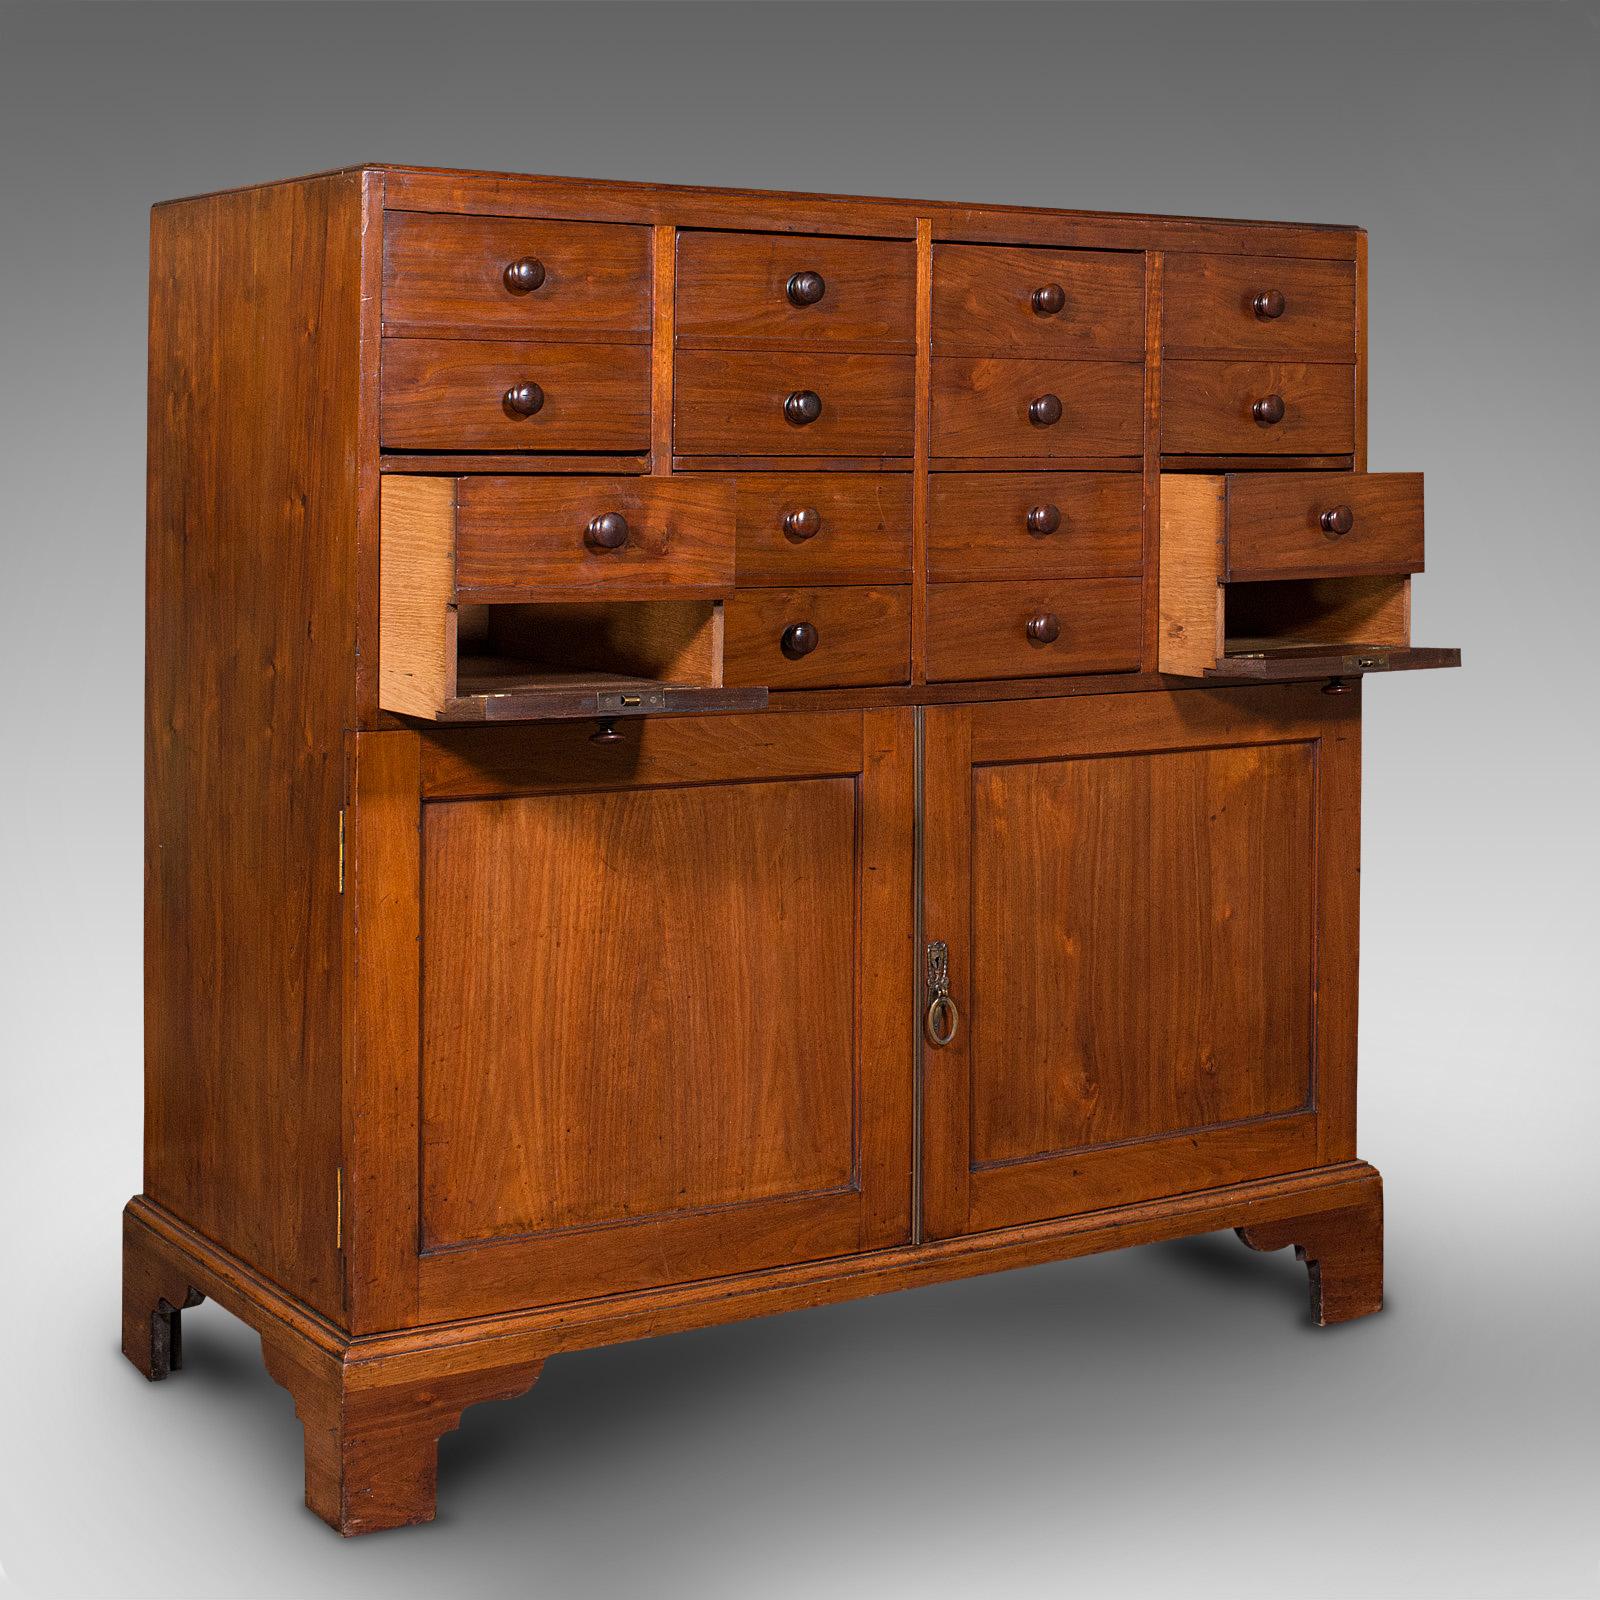 This is a large antique butler's cabinet. An English, walnut and oak estate chest of drawers, dating to the early Victorian period, circa 1850.

Fascinating drop front cabinet of fine quality
Displaying a desirable aged patina throughout
Select